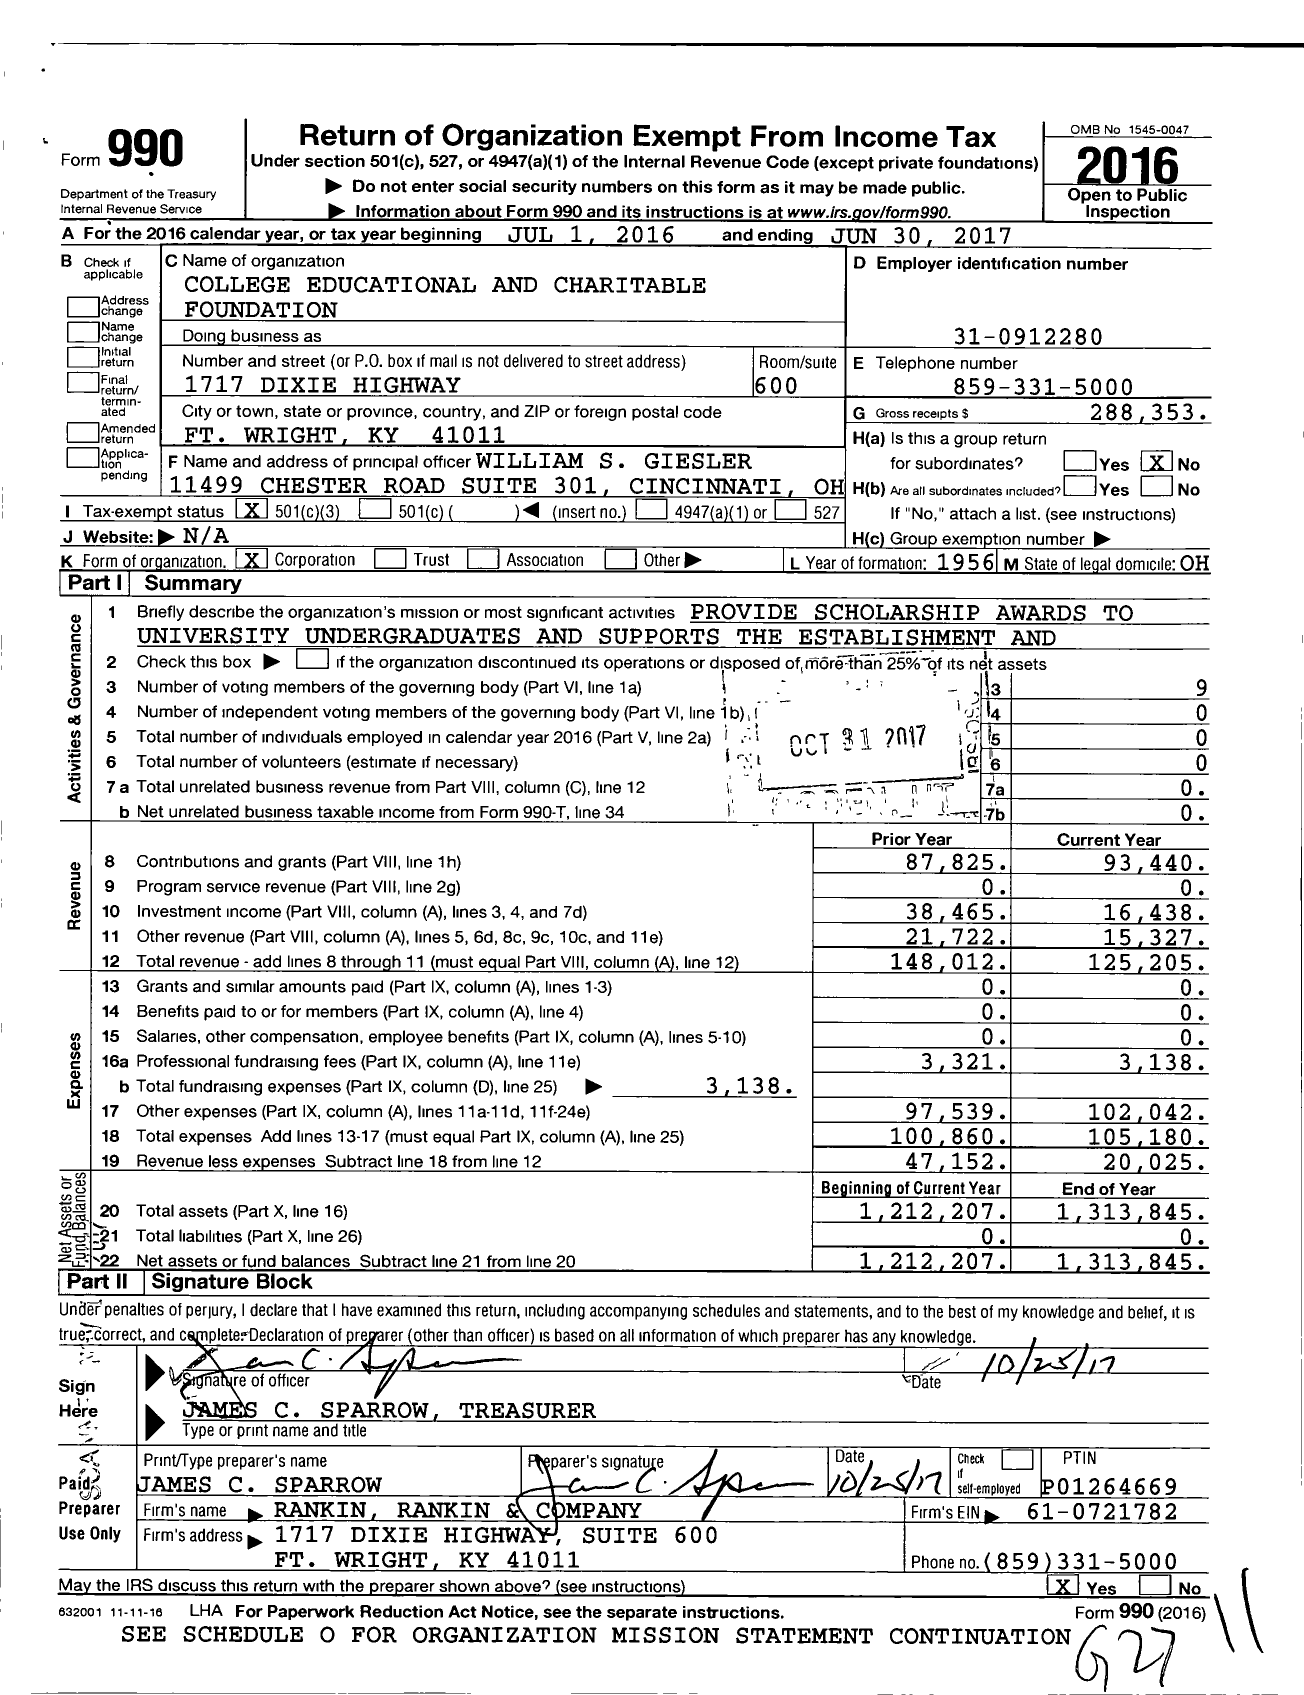 Image of first page of 2016 Form 990 for College Educational and Charitable Foundation